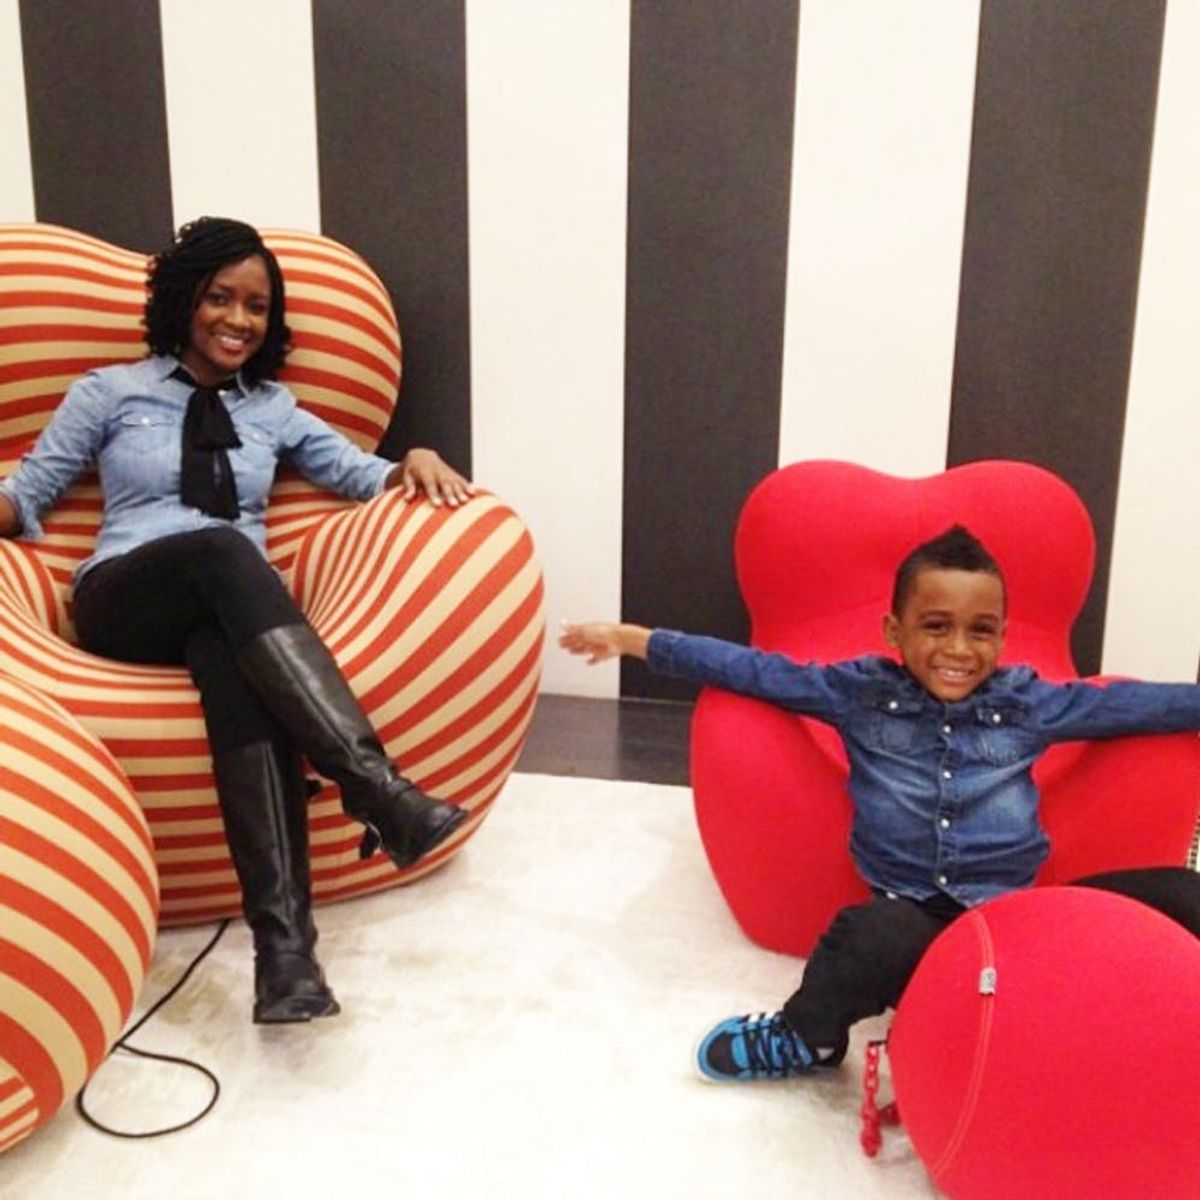 11 Stylish Moms Show Us How to Rock Coordinating Looks With the Kiddos